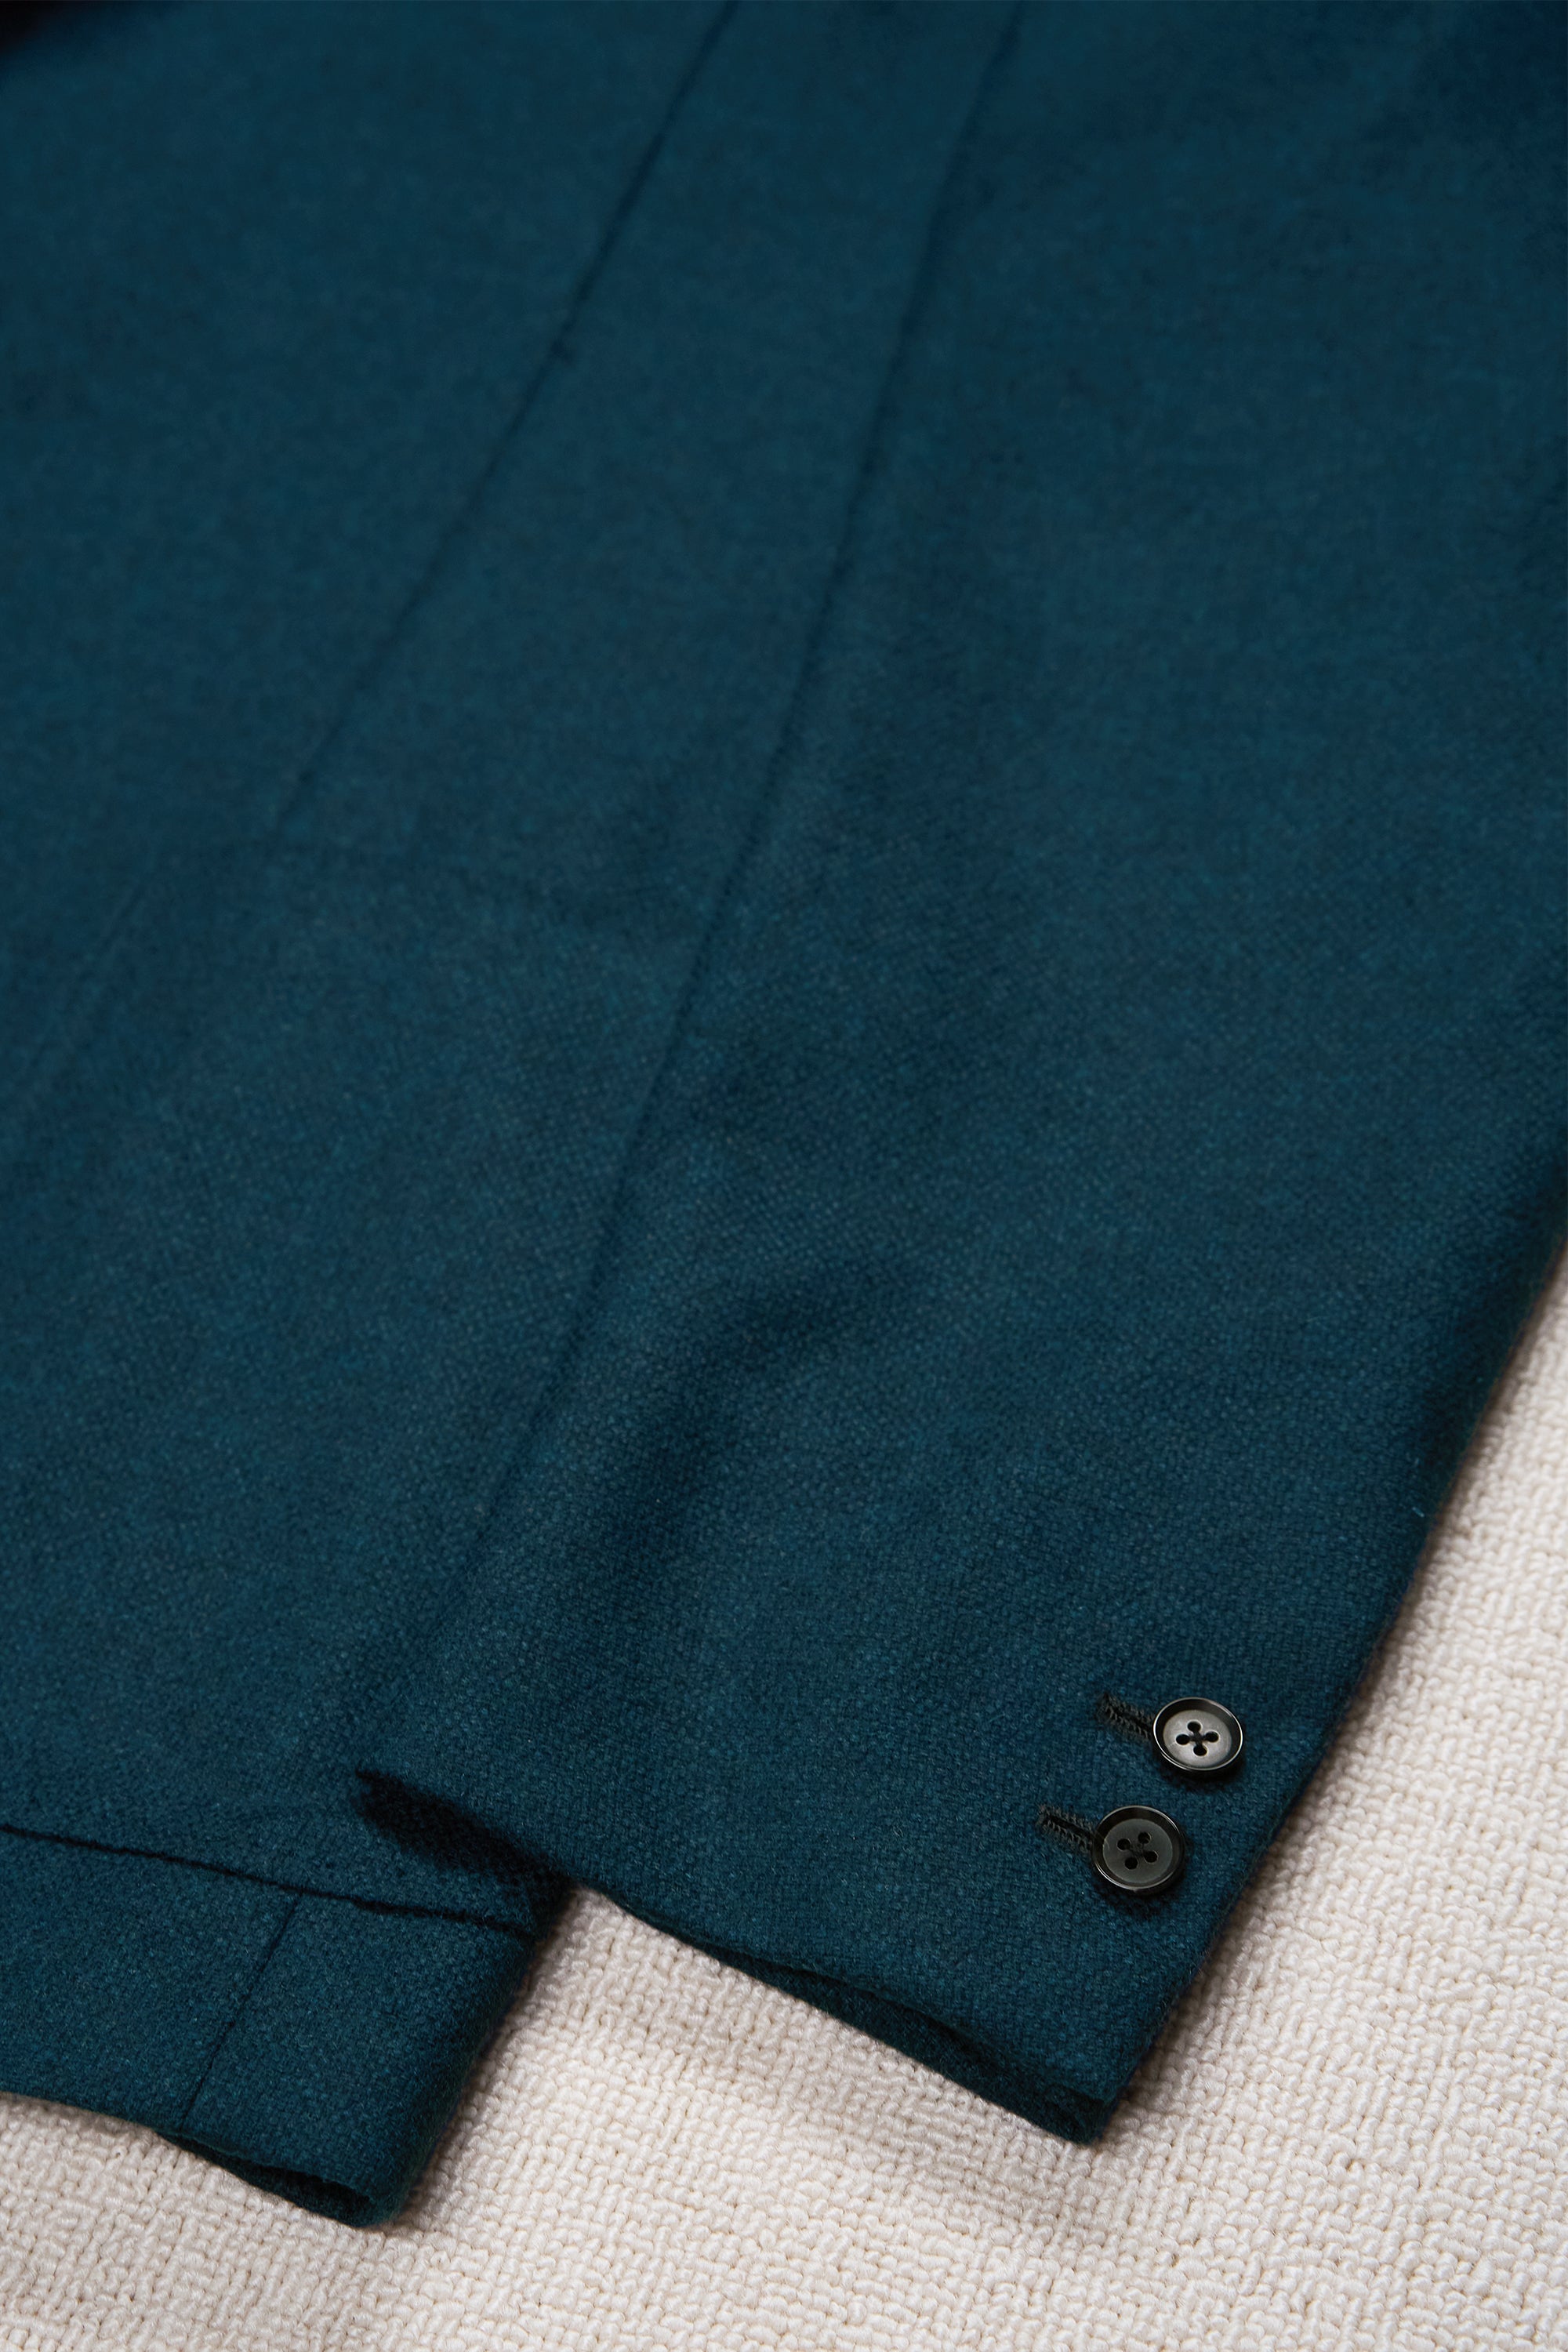 The Armoury by Ring Jacket Model 3 Blue Green Wool Sport Coat